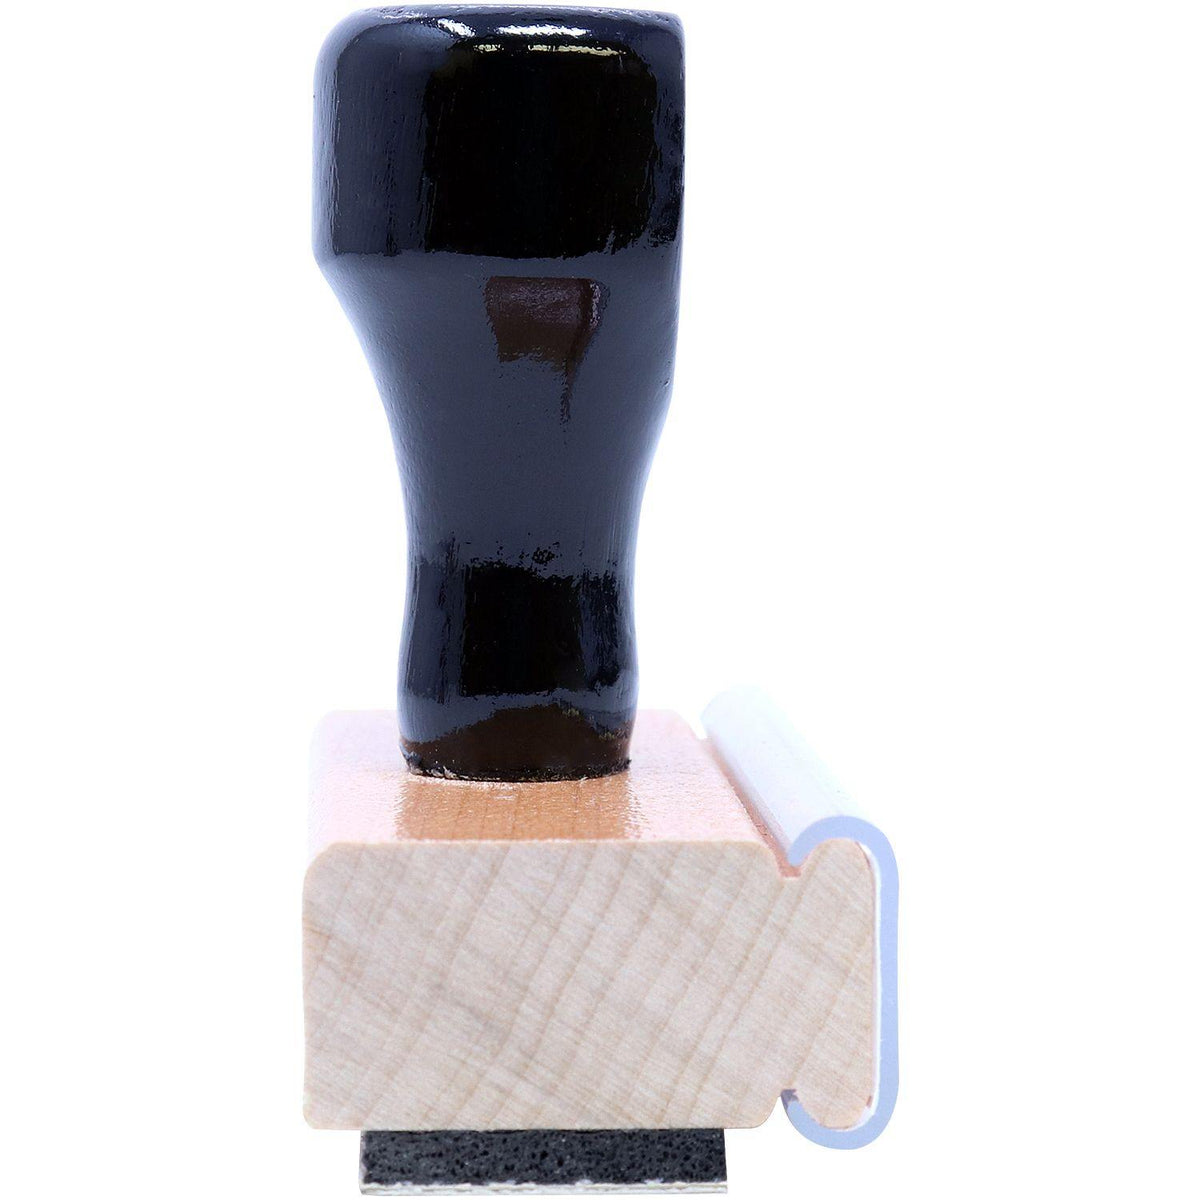 Side View of Despachado Rubber Stamp